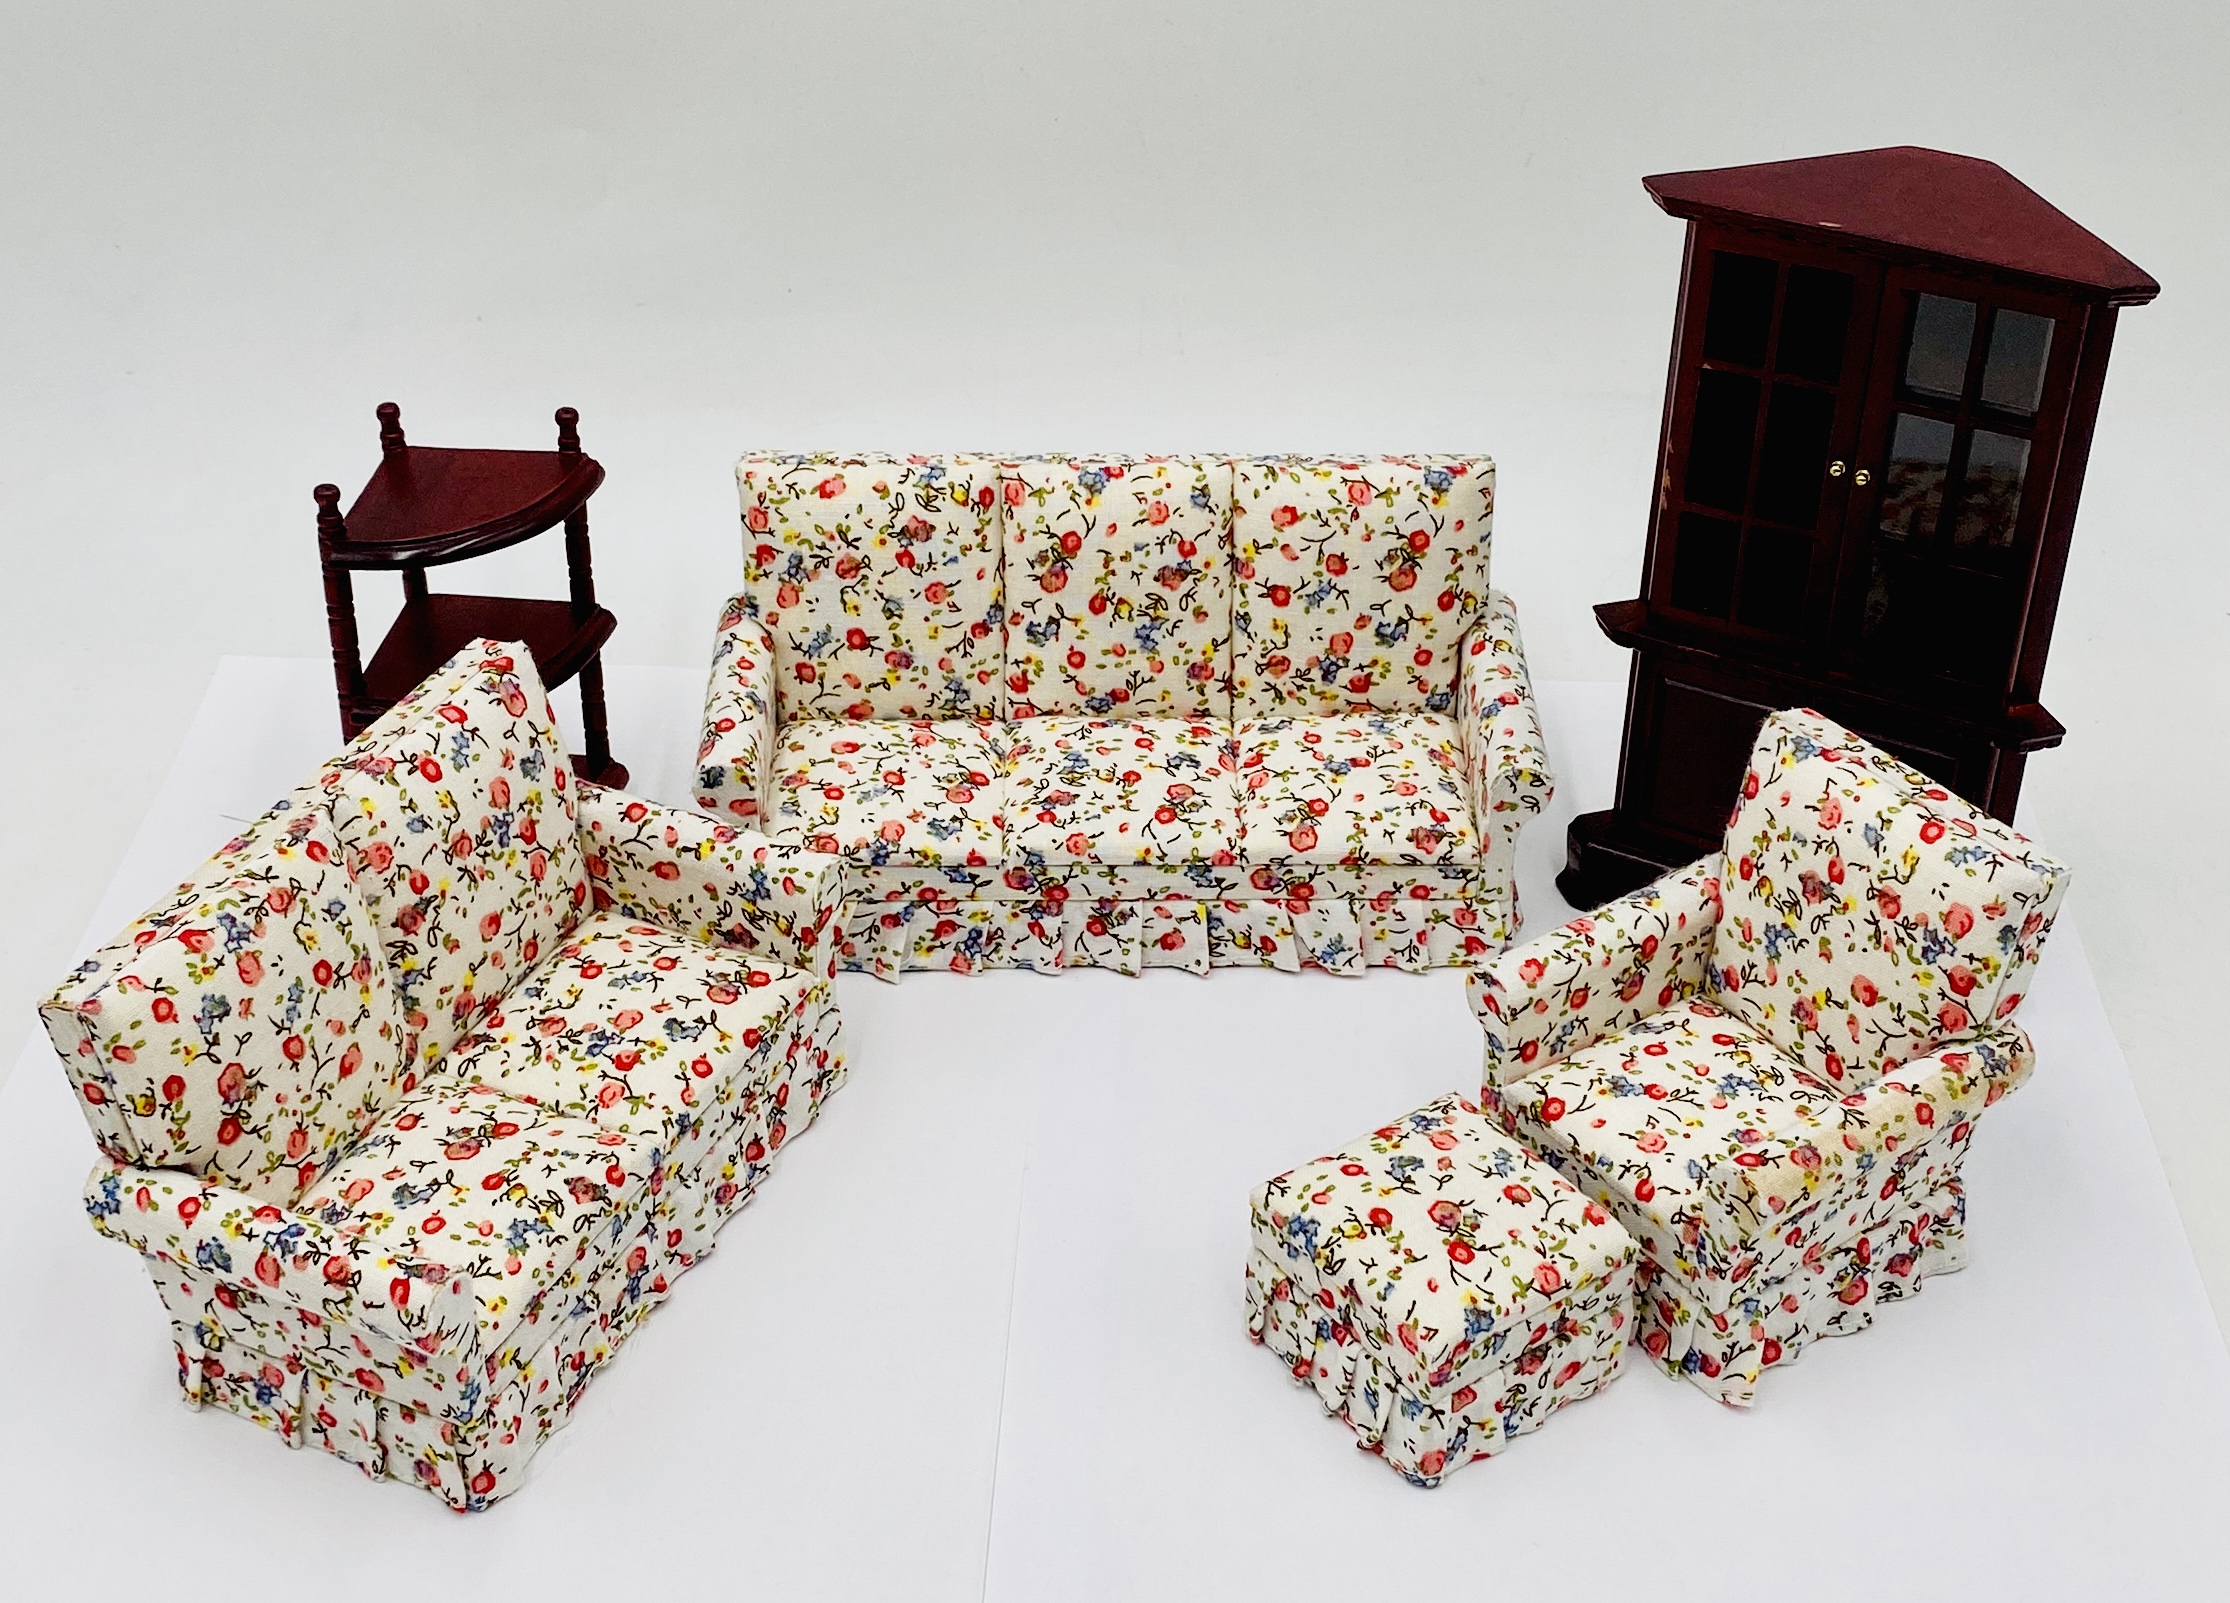 A collection of dolls house furniture including a floral three-piece suite, dining table and chairs, - Image 3 of 6